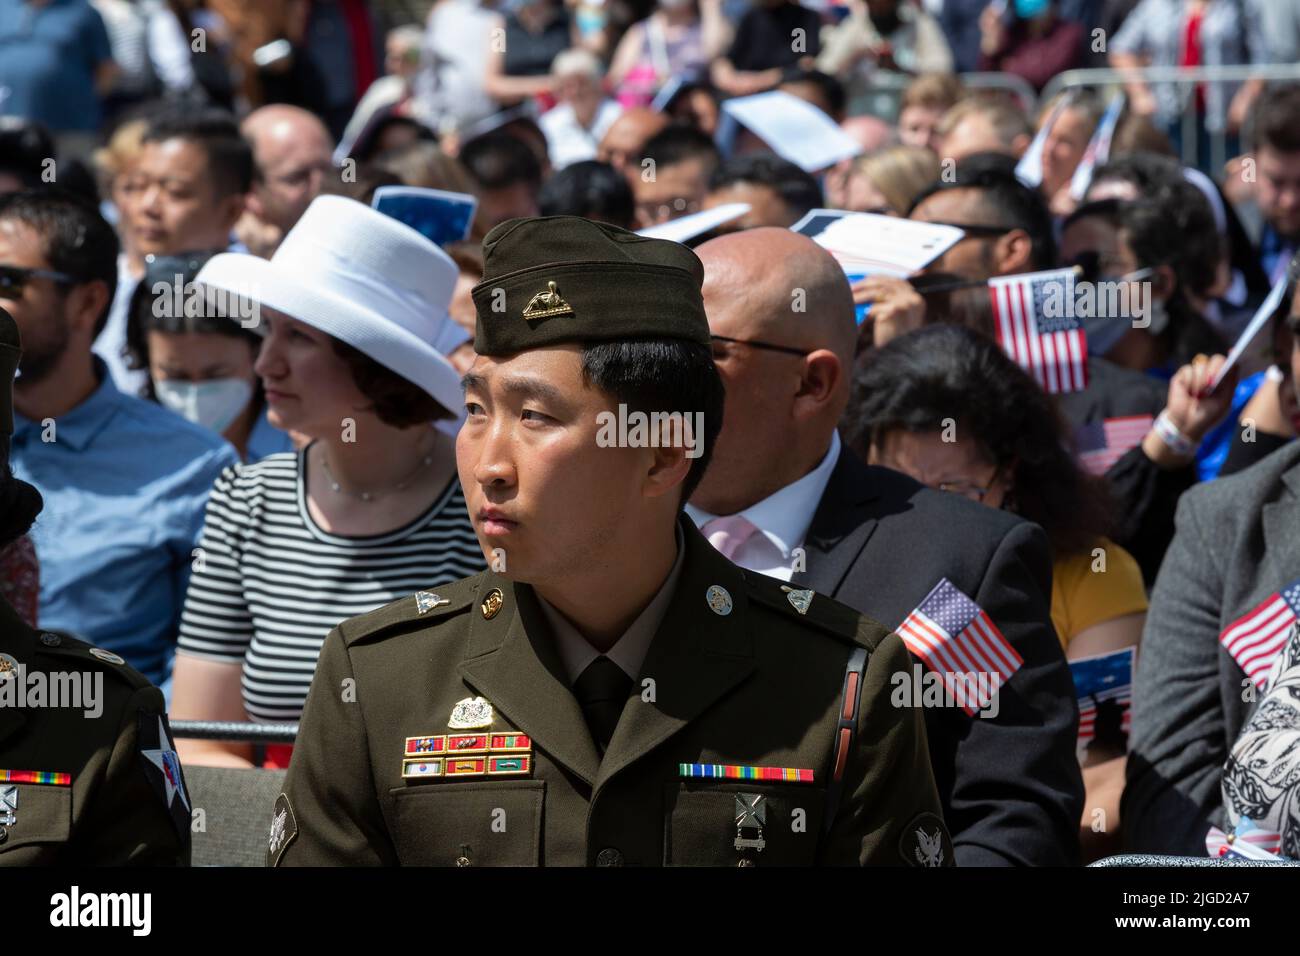 Members of the U.s. military and candidates for U.S. citizenship prepare to be sworn in at a naturalization ceremony at Fisher Pavilion in Seattle on Stock Photo